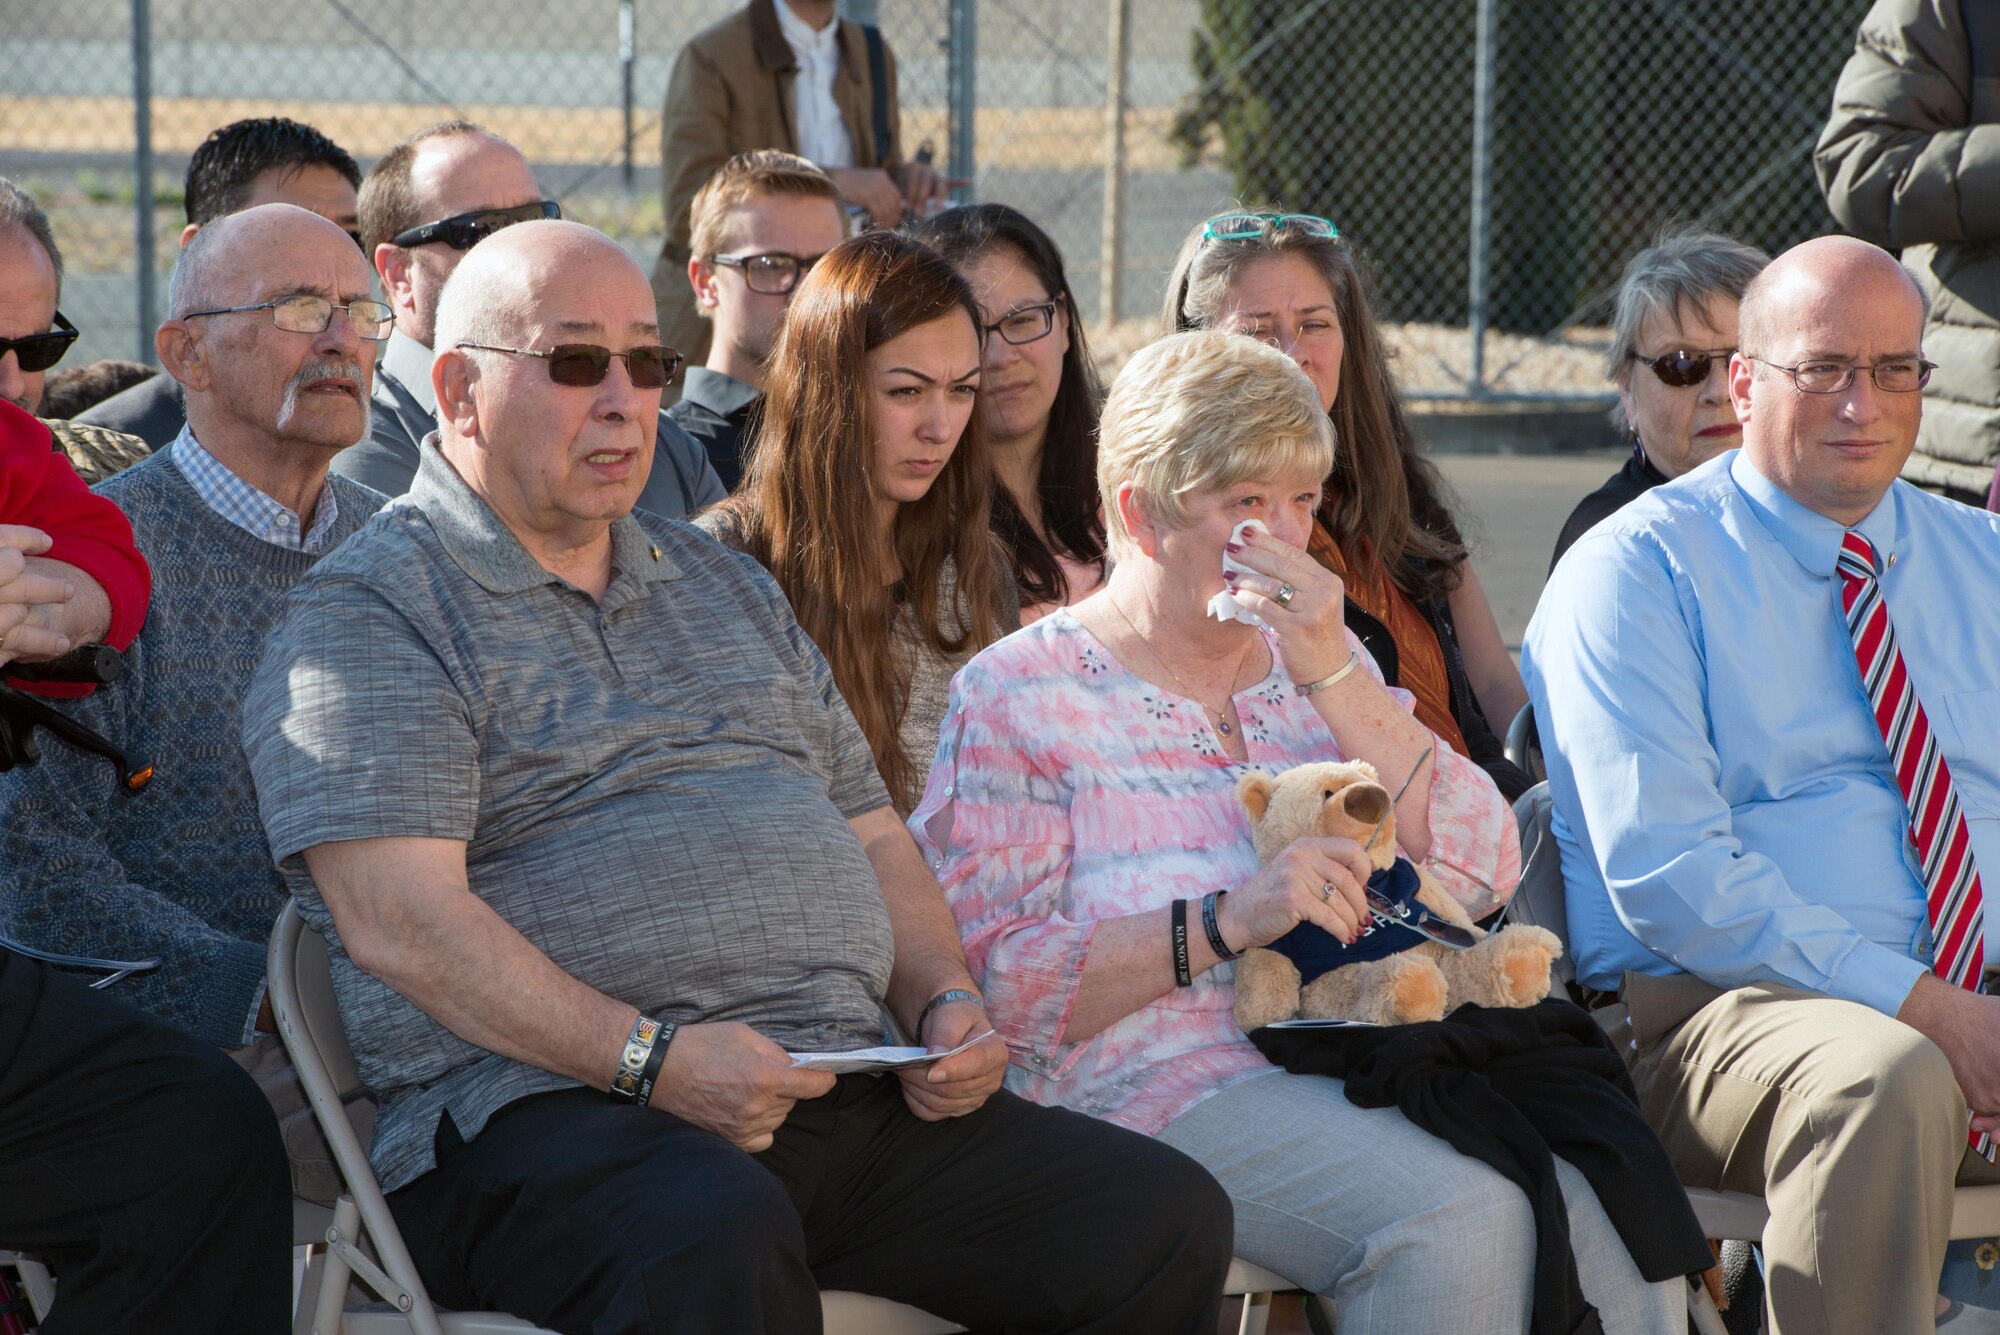 Loreene Wieger, mother of OSI agent David Wieger weeps during a ceremony honoring her Son at Travis Air Force Base, Calif., Nov. 1, 2017. David Wieger was killed in 2007 when an improvised explosive device struck his vehicle during his deployment in support of Operation Iraqi Freedom. The Office of Special Investigation, 12th Field Investigation Squadron, unveiled the renaming of their building to the fallen OSI agent. Wieger was stationed at Travis at the time and was posthumously awarded the Bronze Star, Purple Heart, AF Commendation Medal, and AF Combat Action Medal. (U.S. Air Force photo by Louis Briscese)